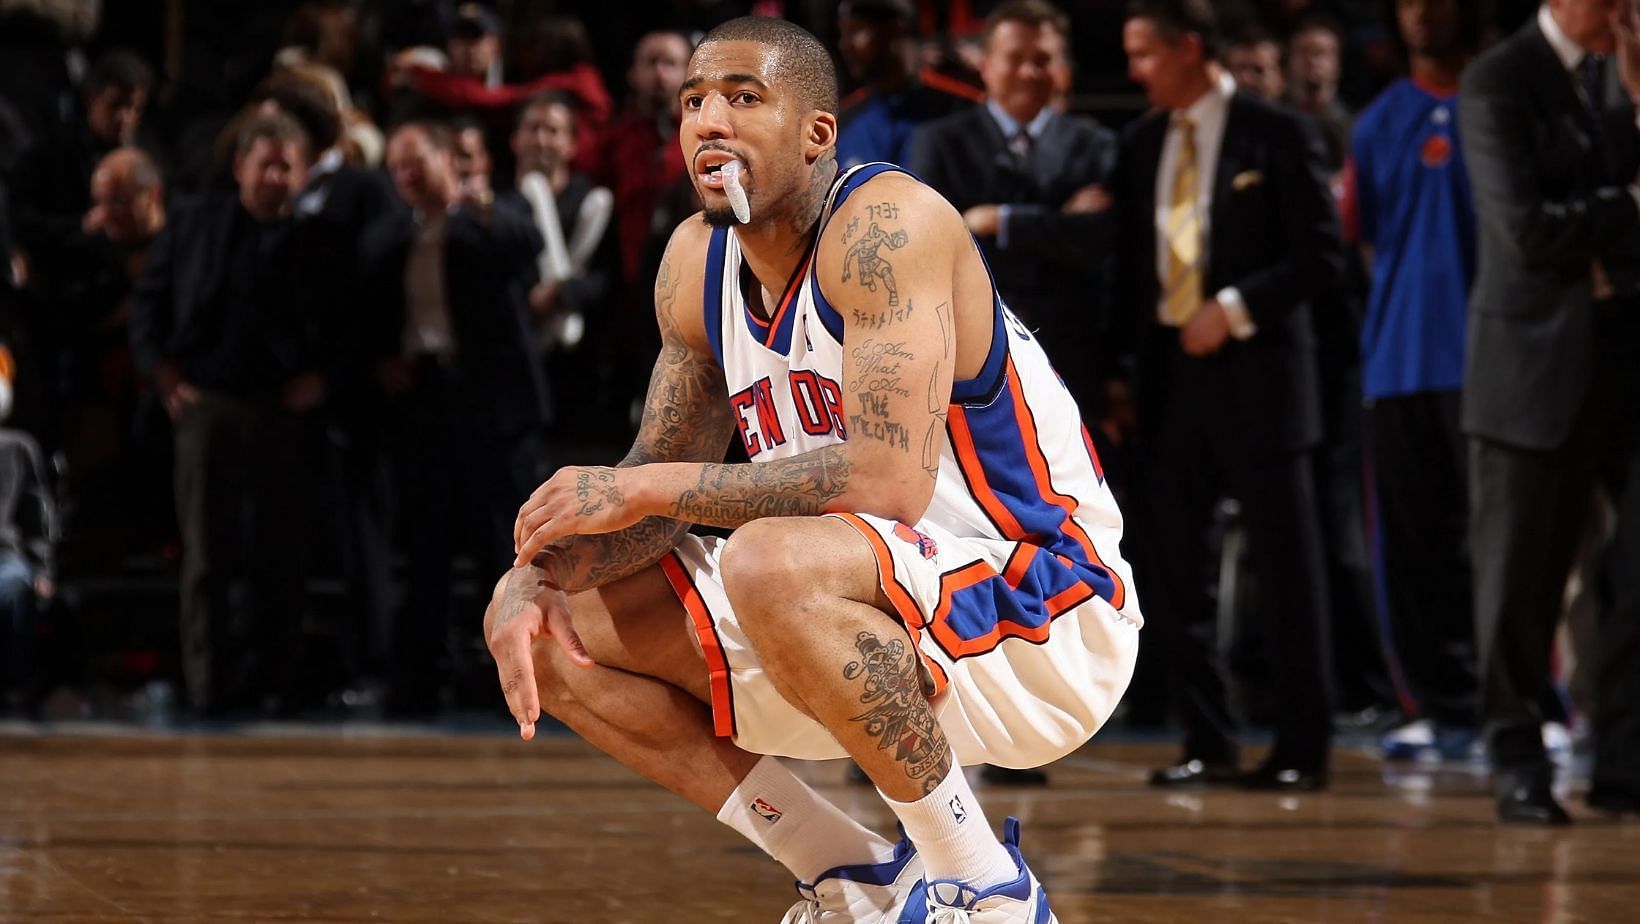 Wilson Chandler was a 12-year NBA veteran who played for several teams, including the New York Knicks.